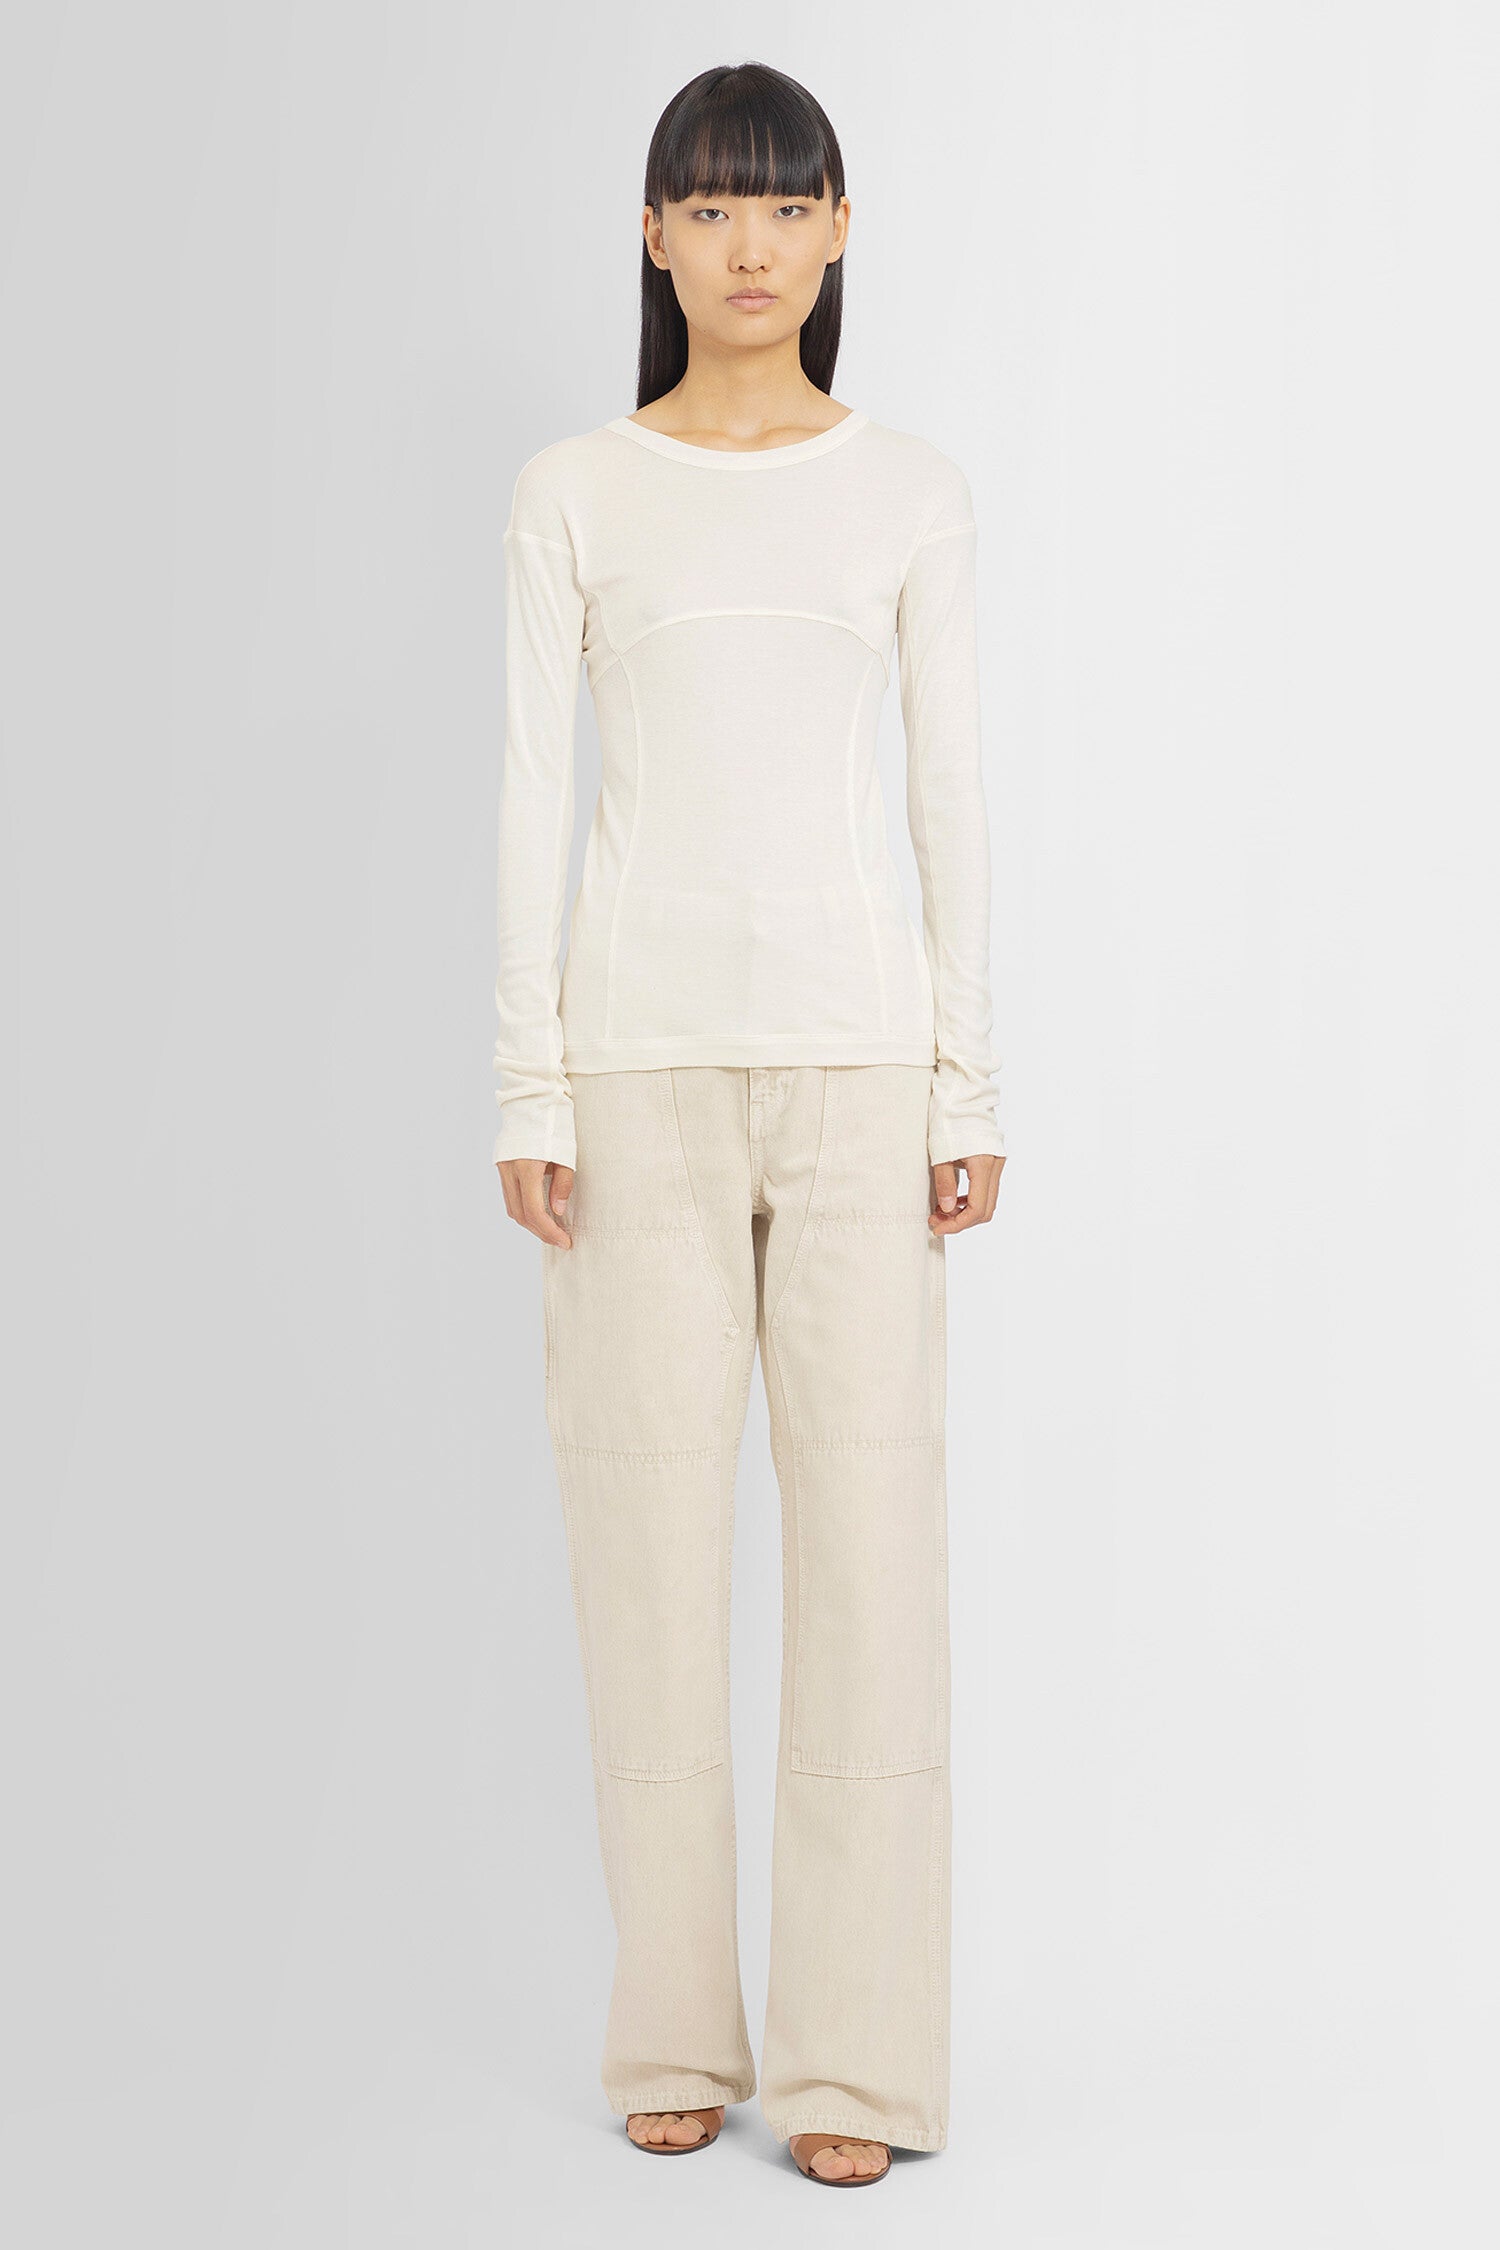 HELMUT LANG WOMAN OFF-WHITE TOPS - HELMUT LANG - TOPS